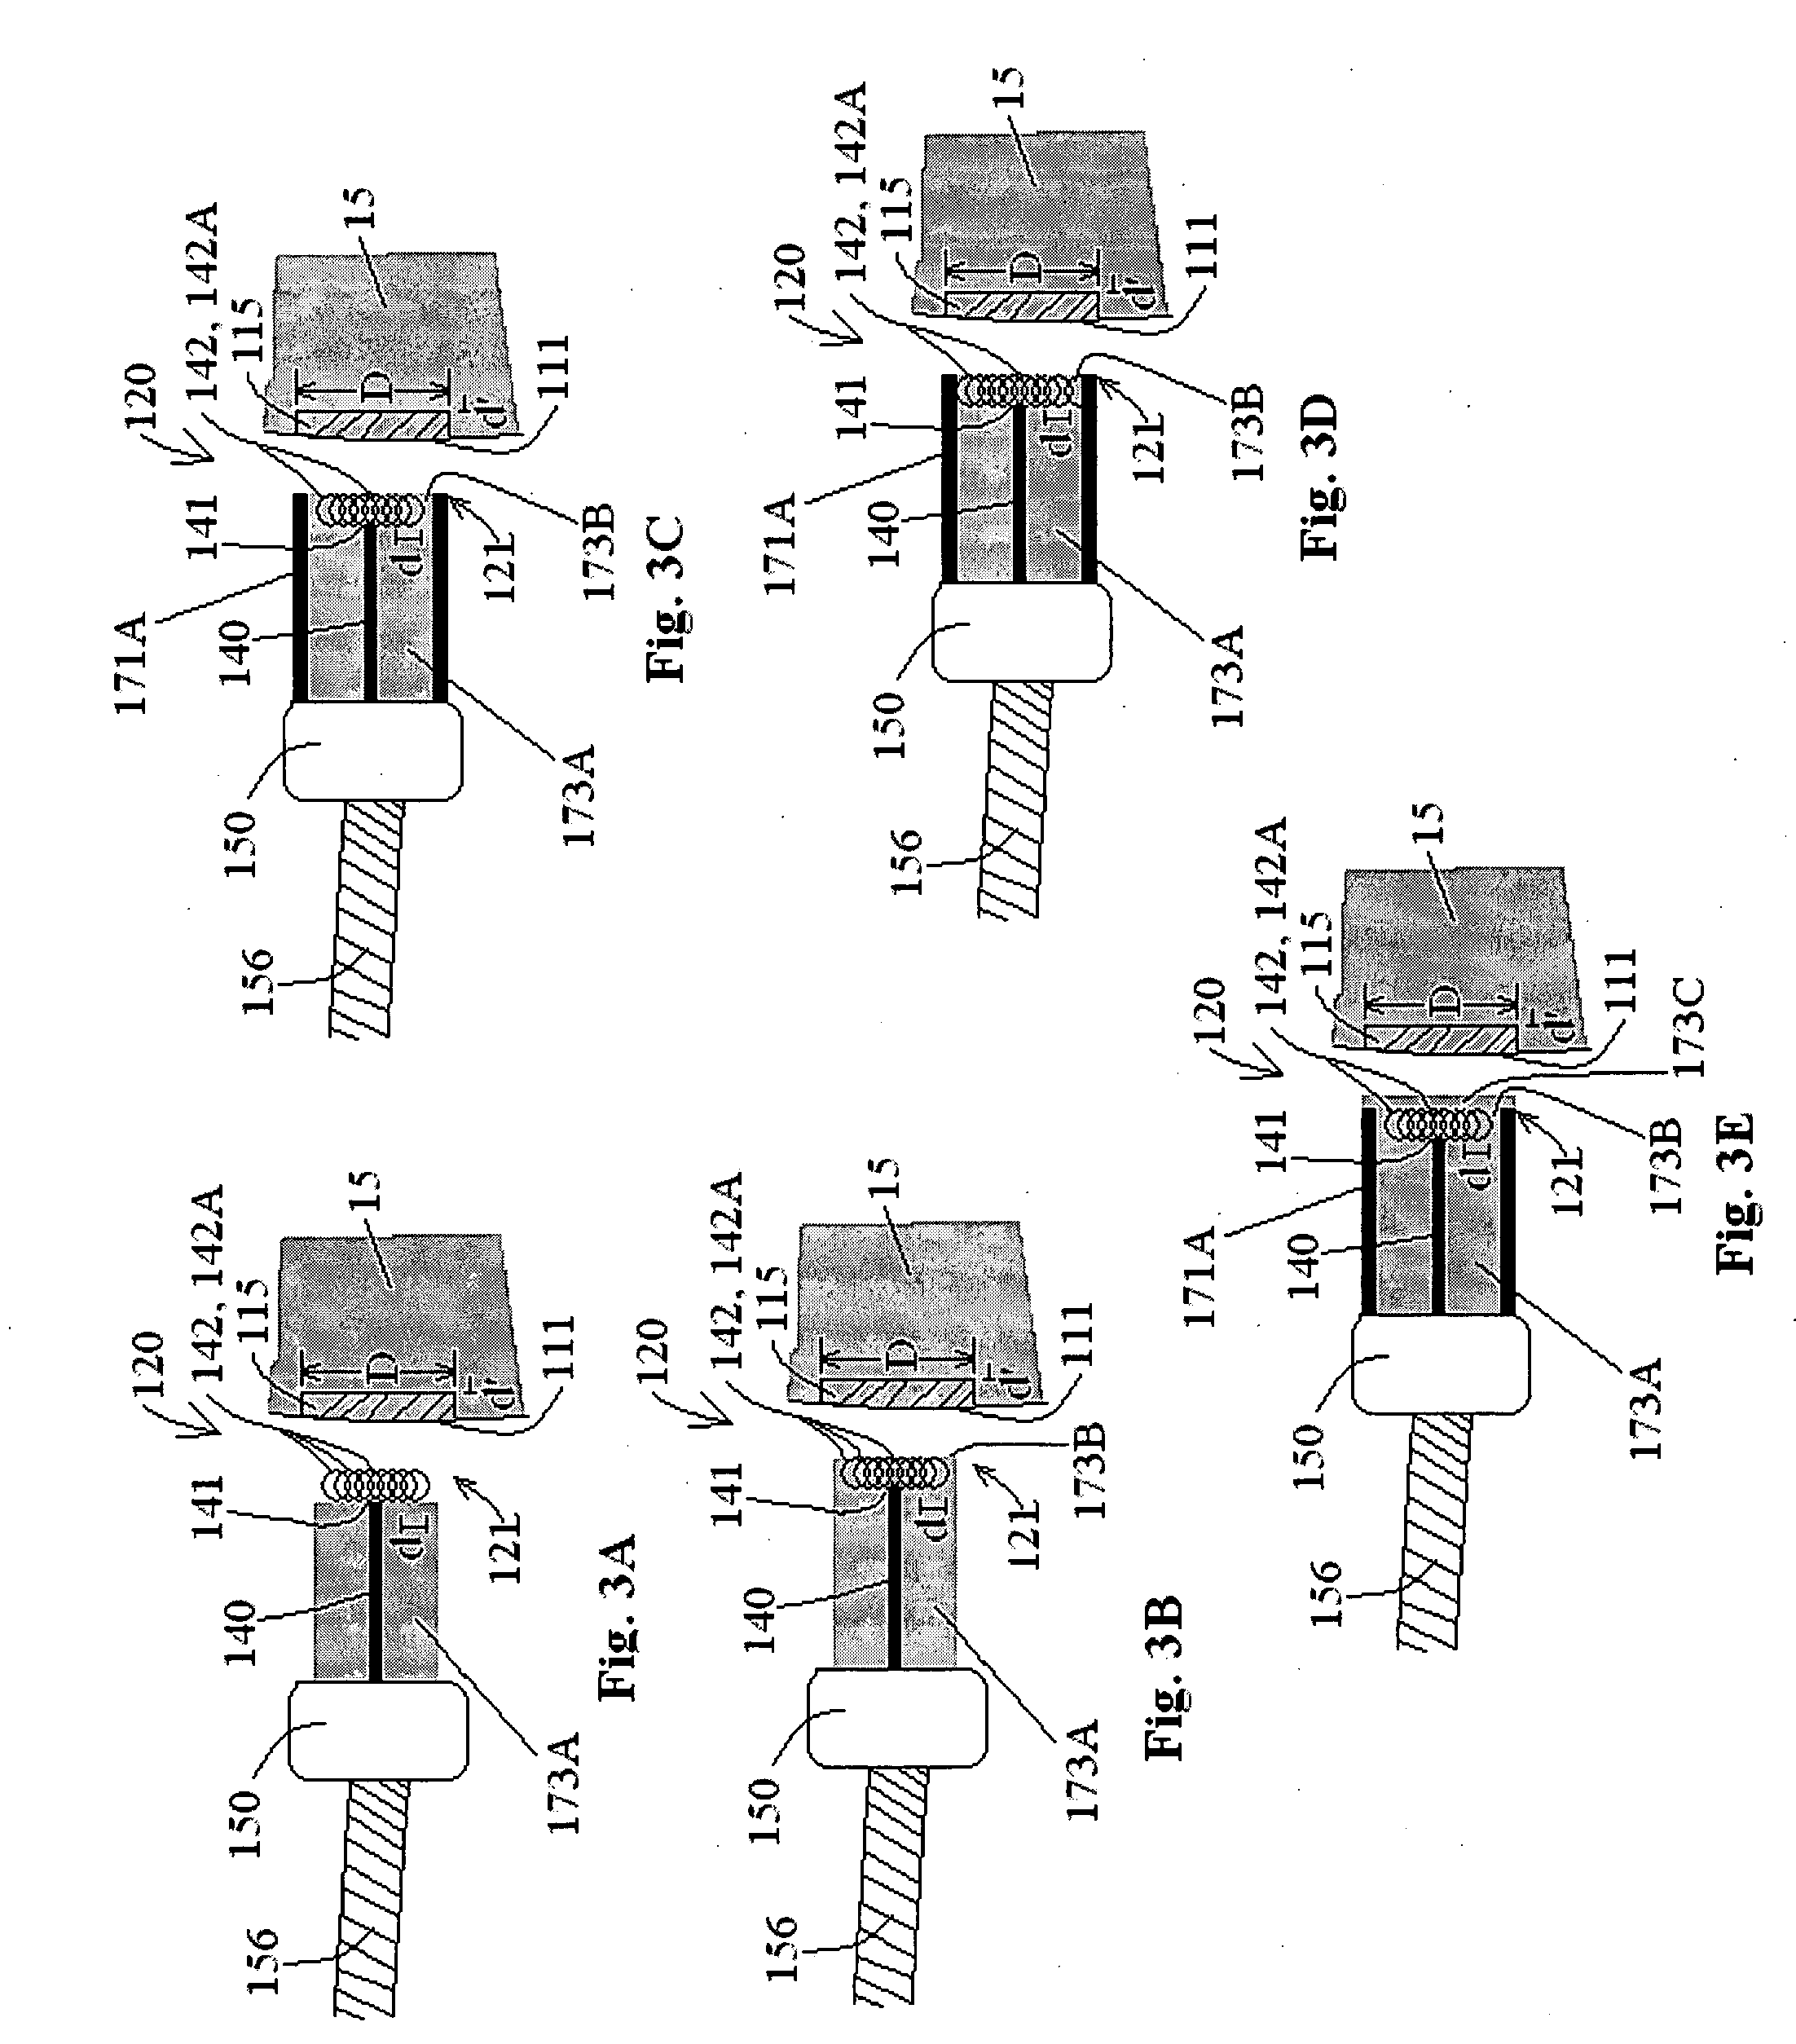 Probes, systems, and methods for examining tissue according to the dielectric properties thereof